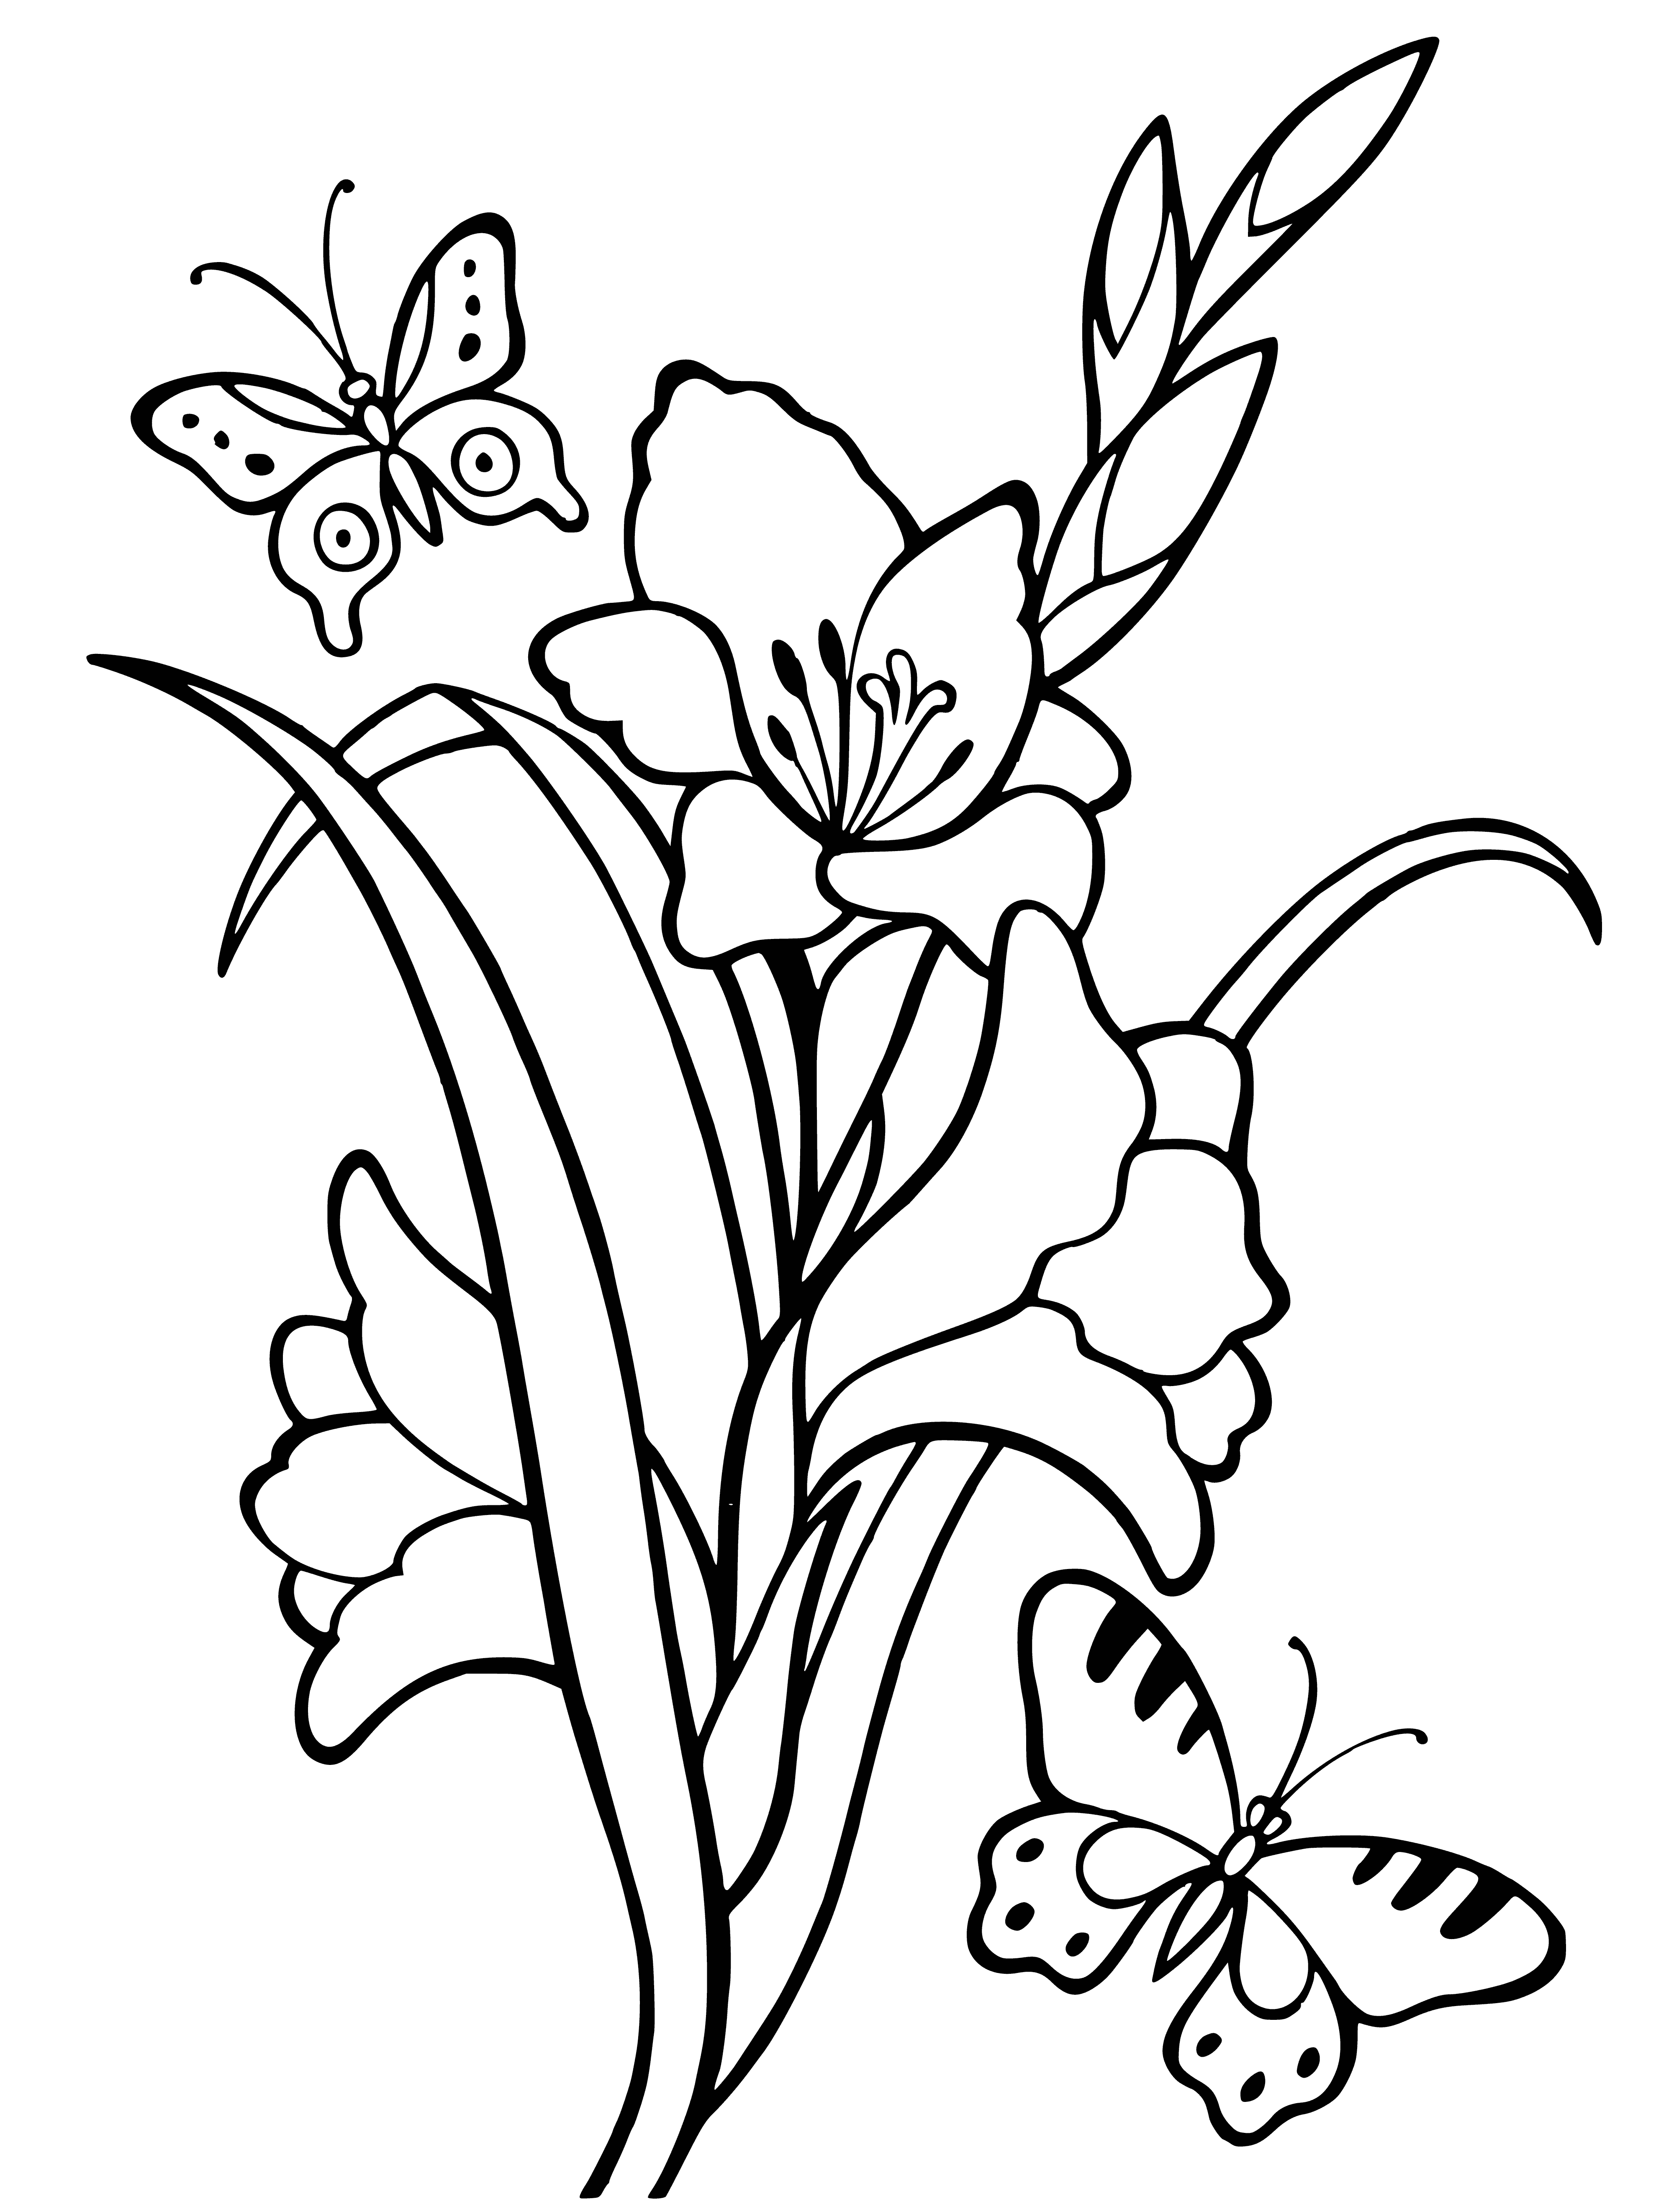 Gladiolus coloring page